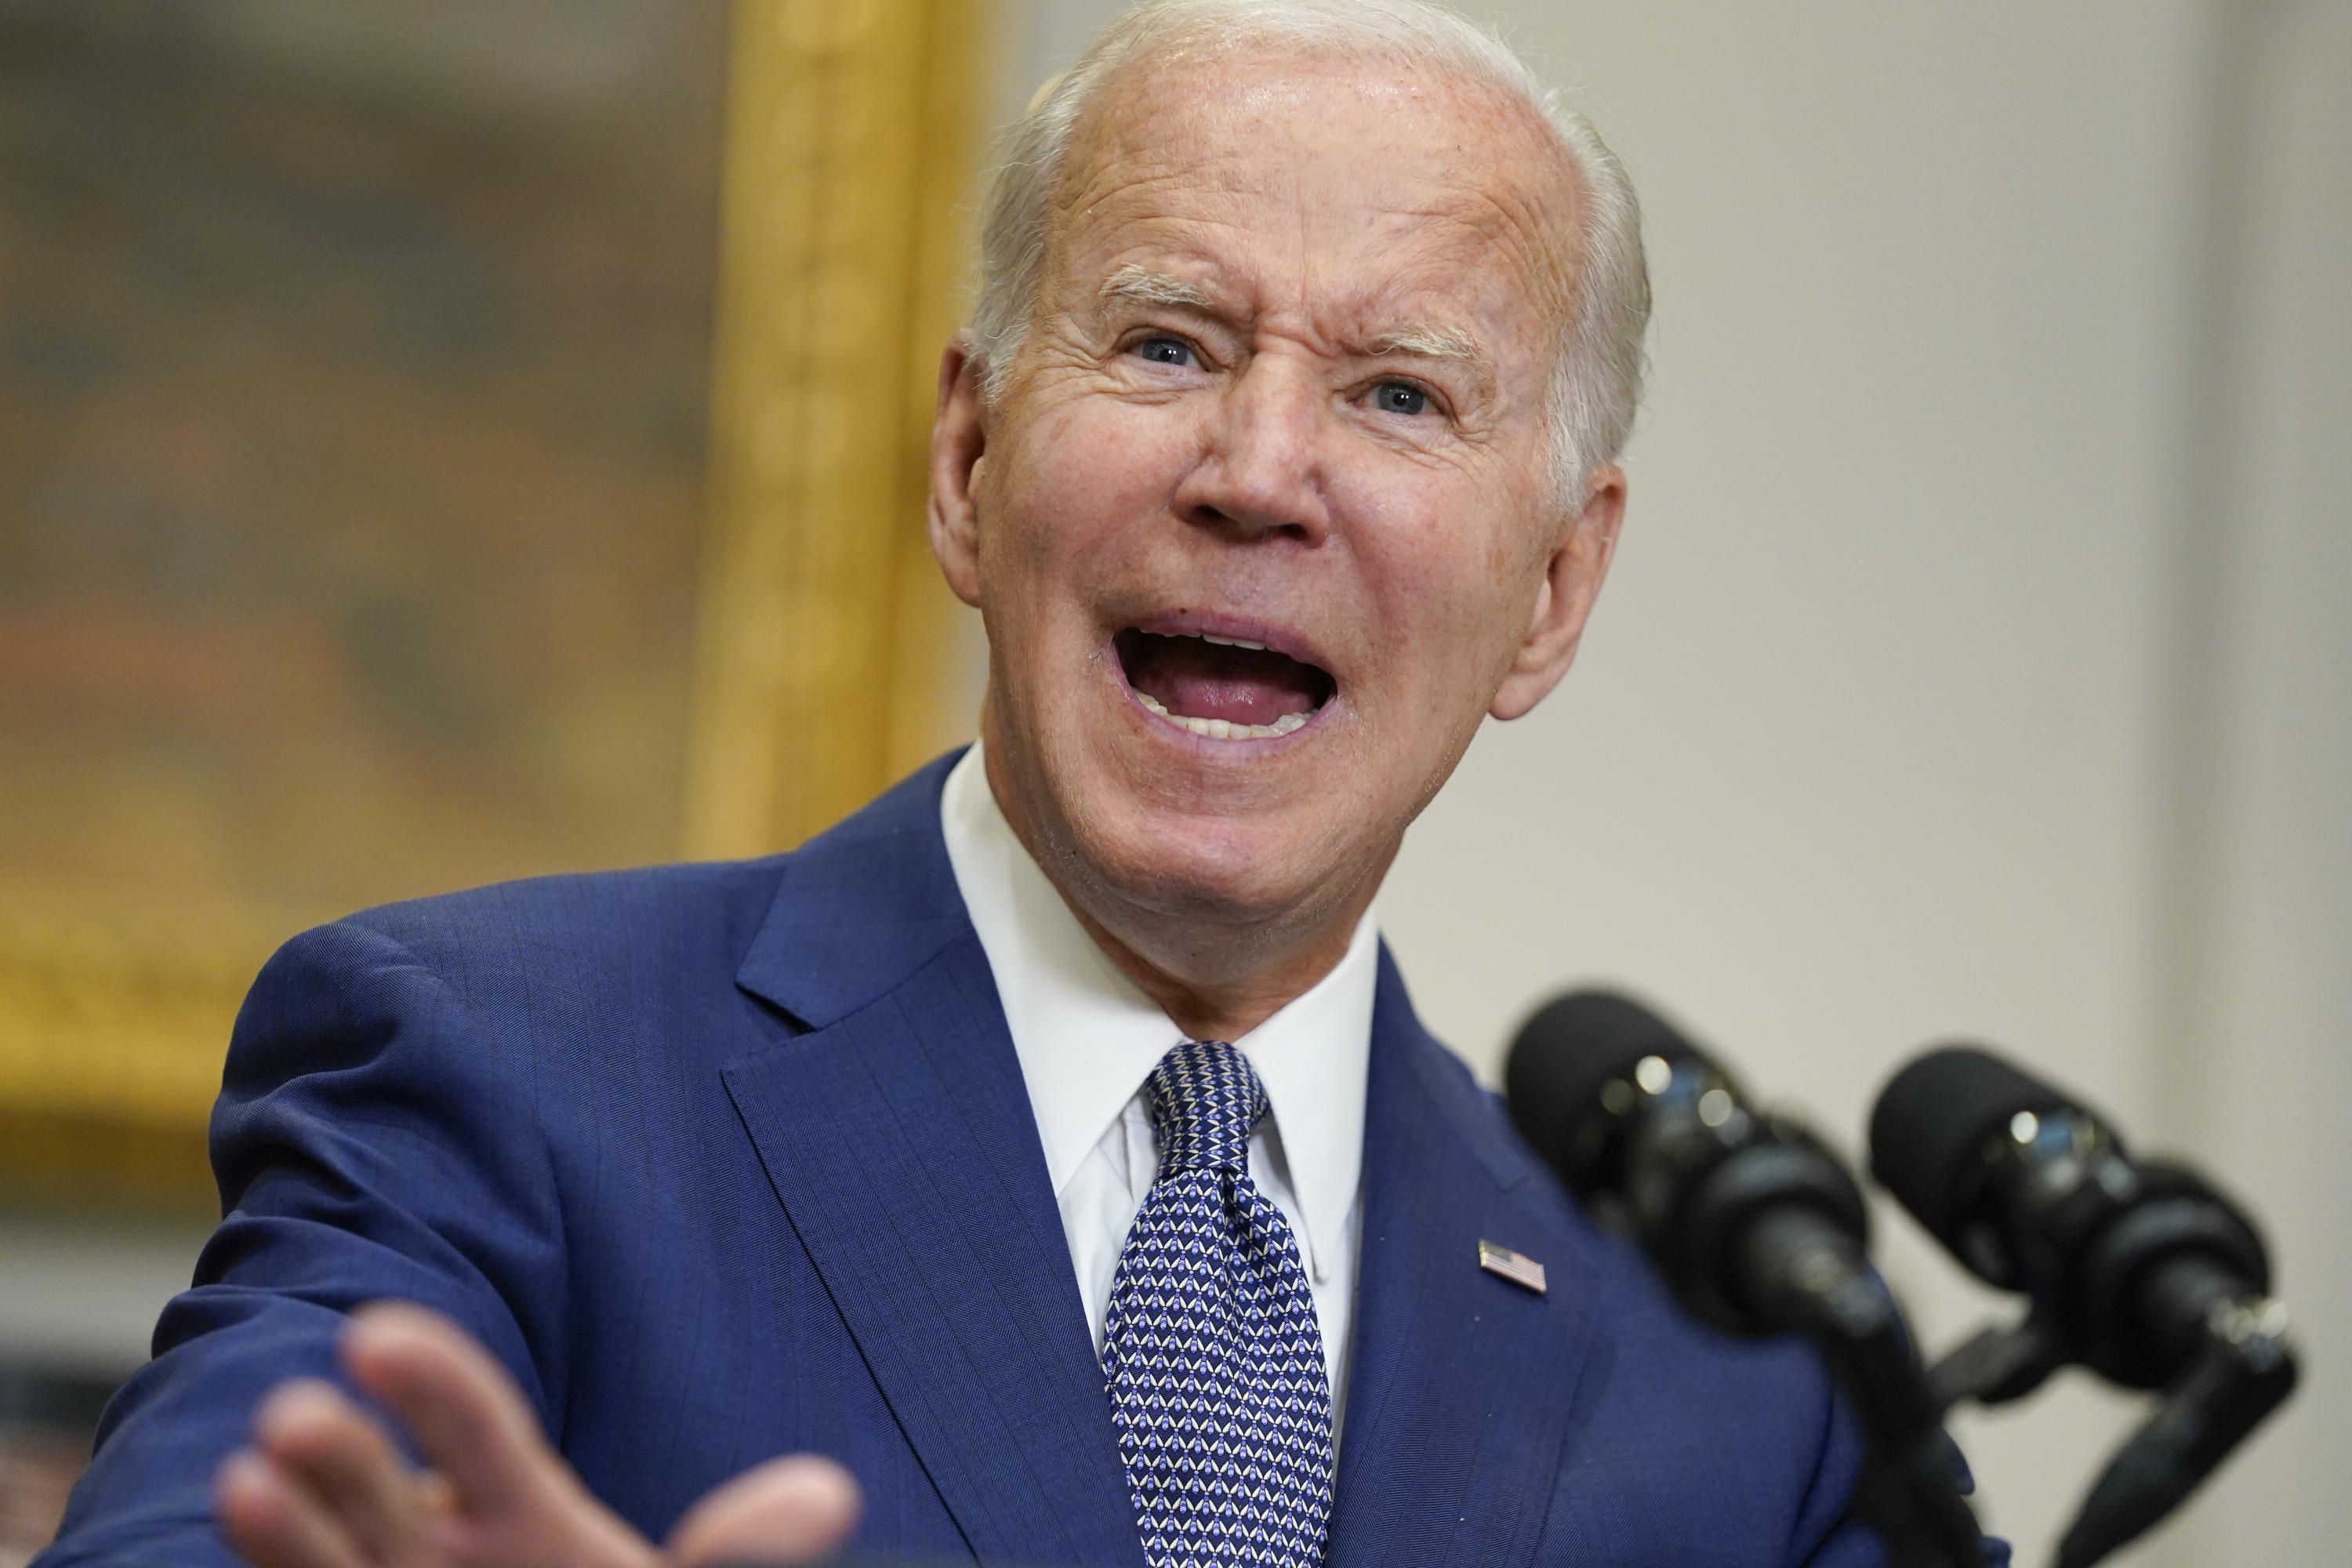 Impassioned Biden signs order on abortion access | AP News